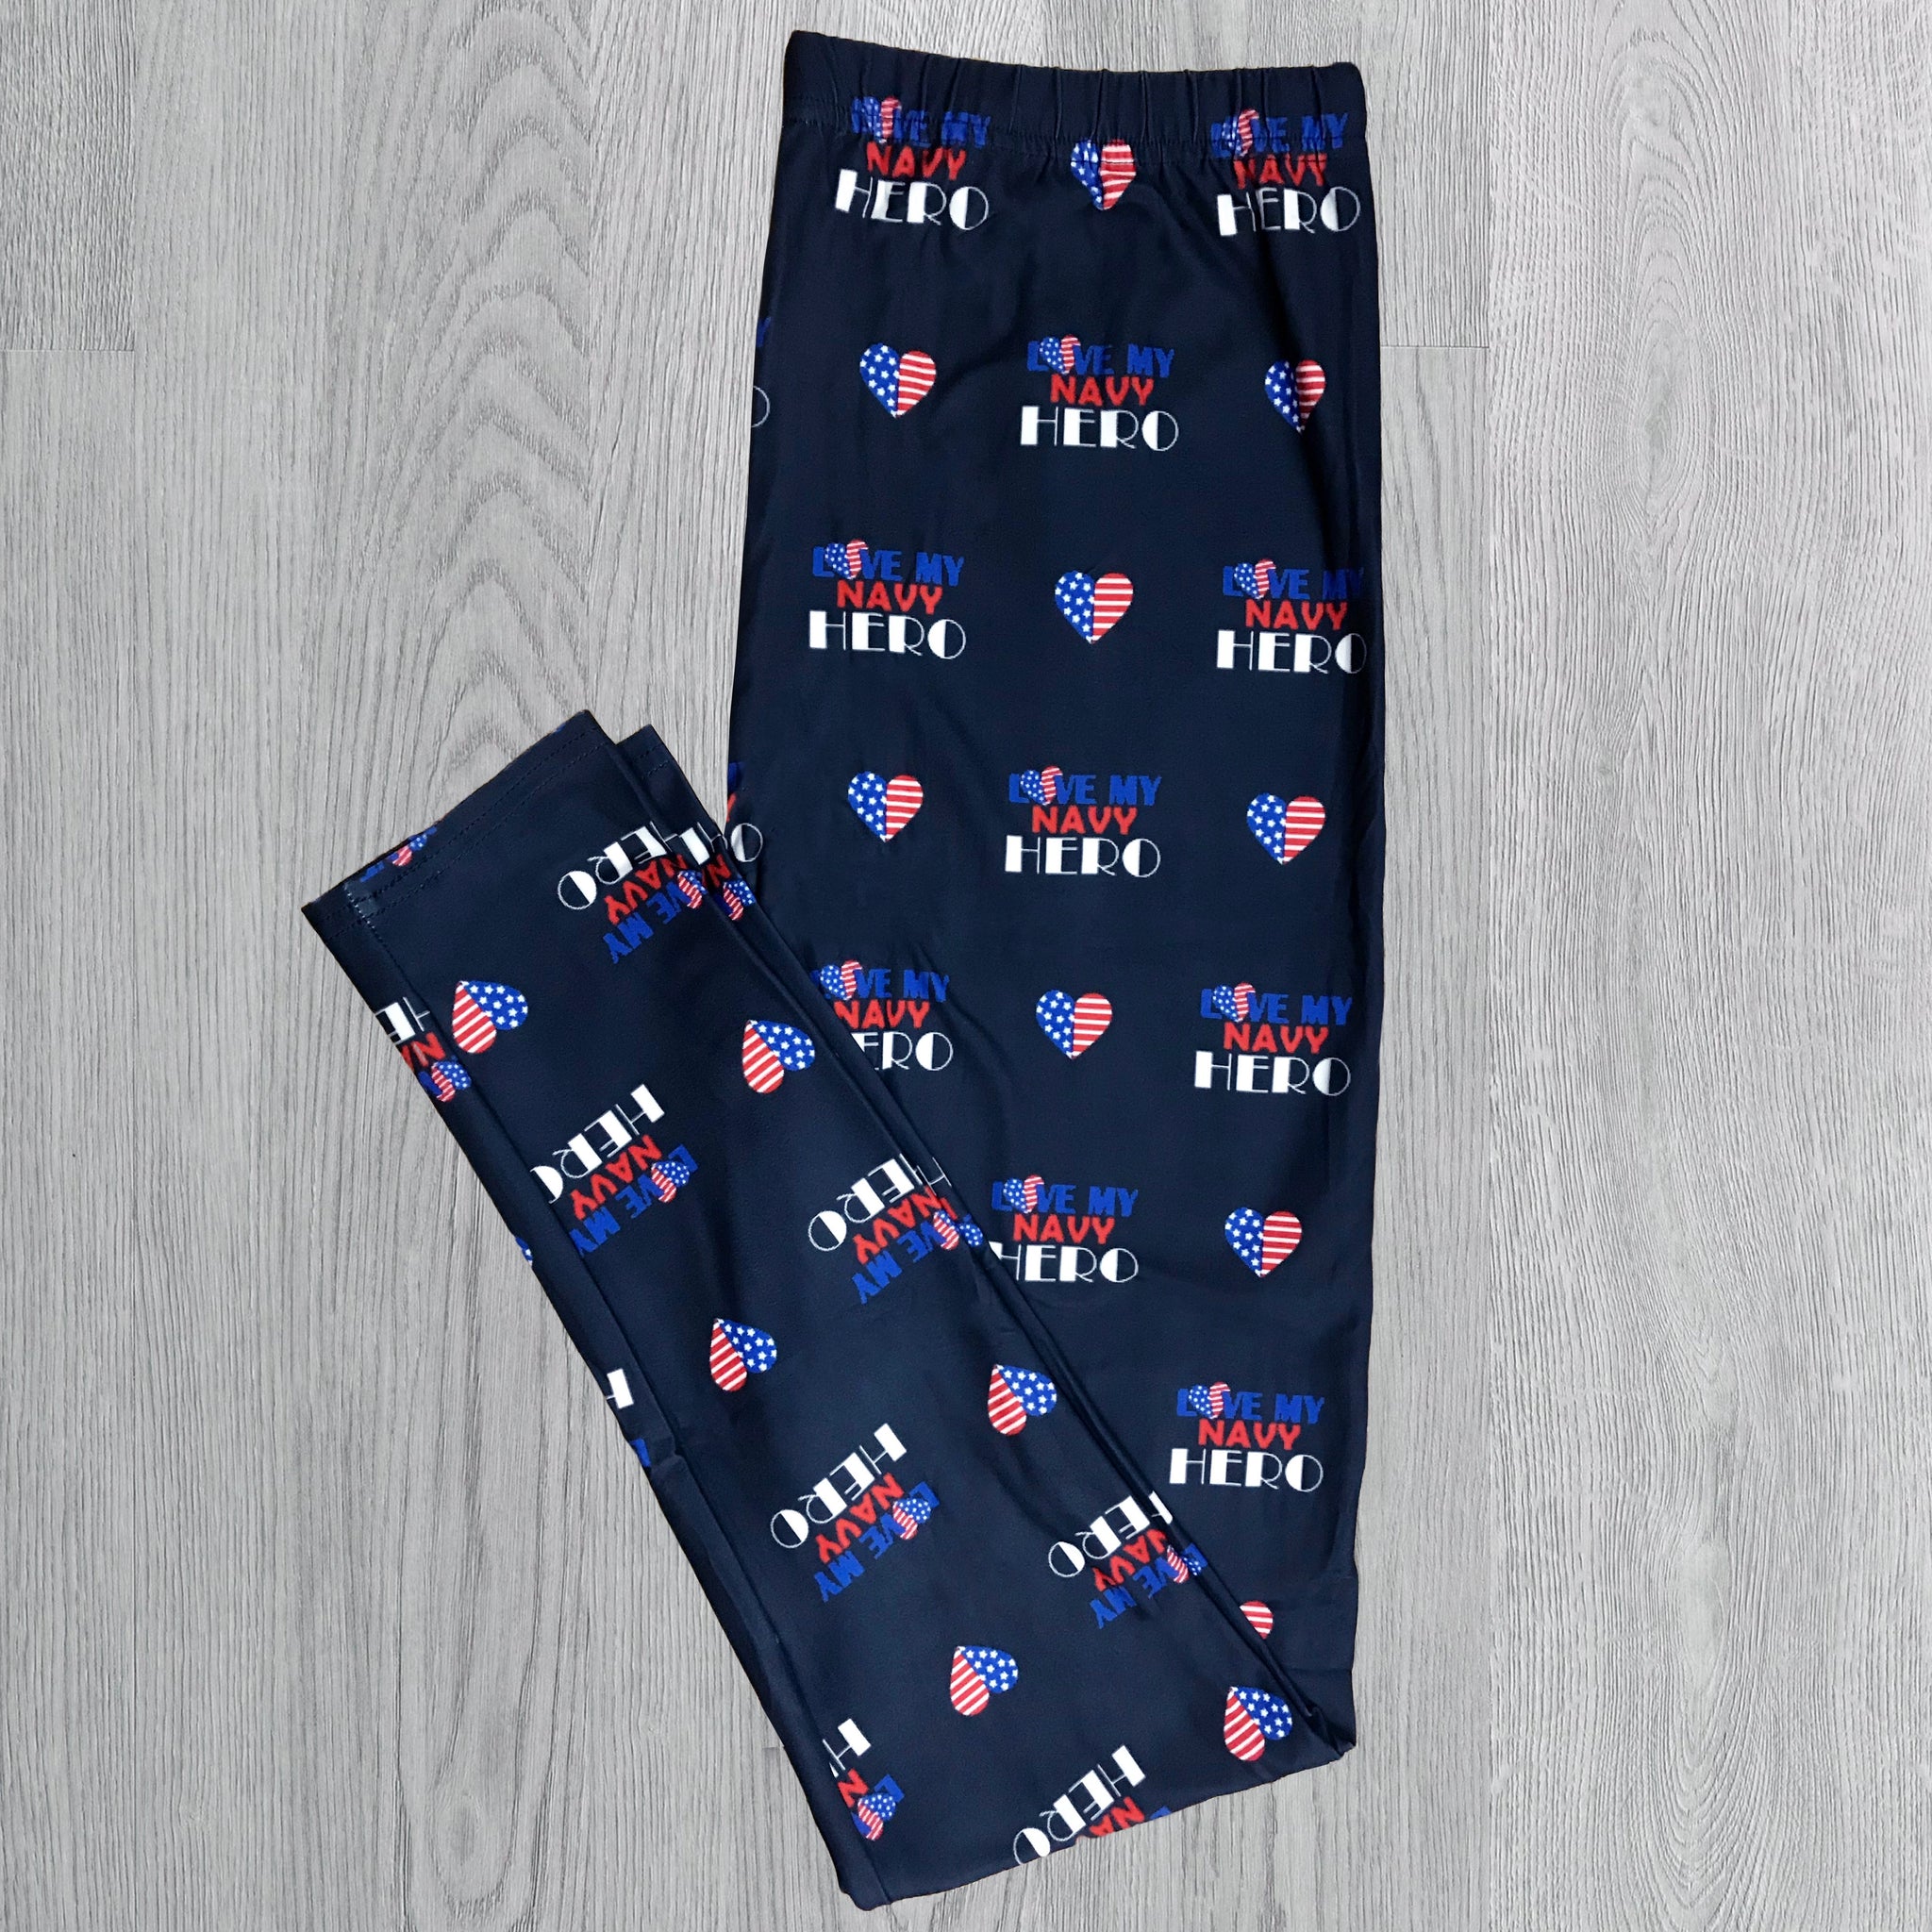 Patriotic Navy Hero Heart Leggings - Comfortable, High-Waisted Stretch Leggings with Patriotic Flair